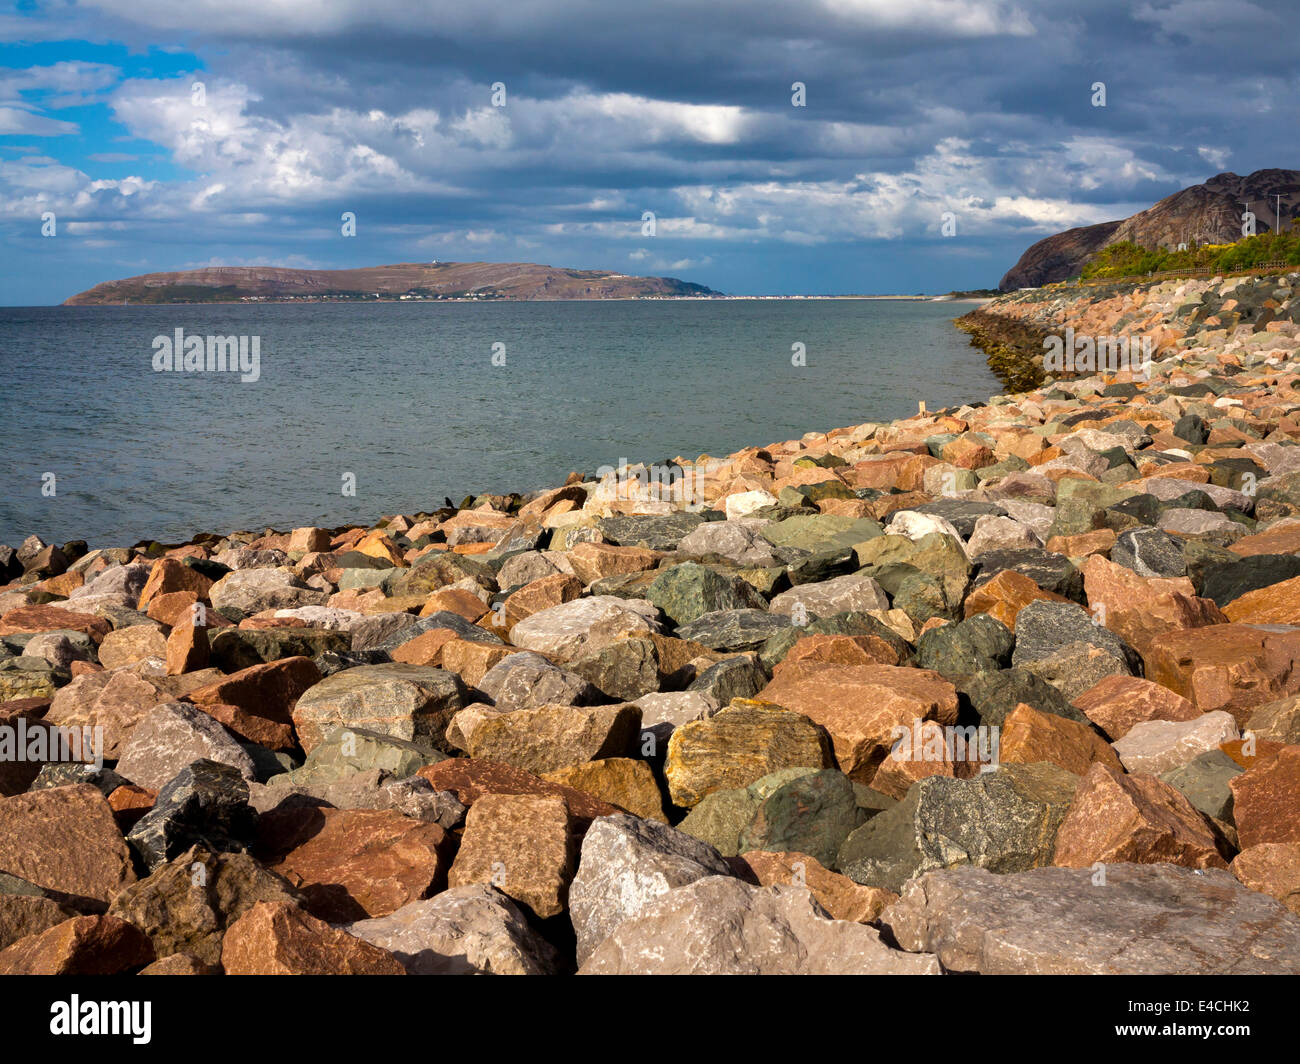 Sea defences on the North Wales coastline at Penmaenmawr in Conwy with large rocks and boulders used to prevent coastal erosion Stock Photo